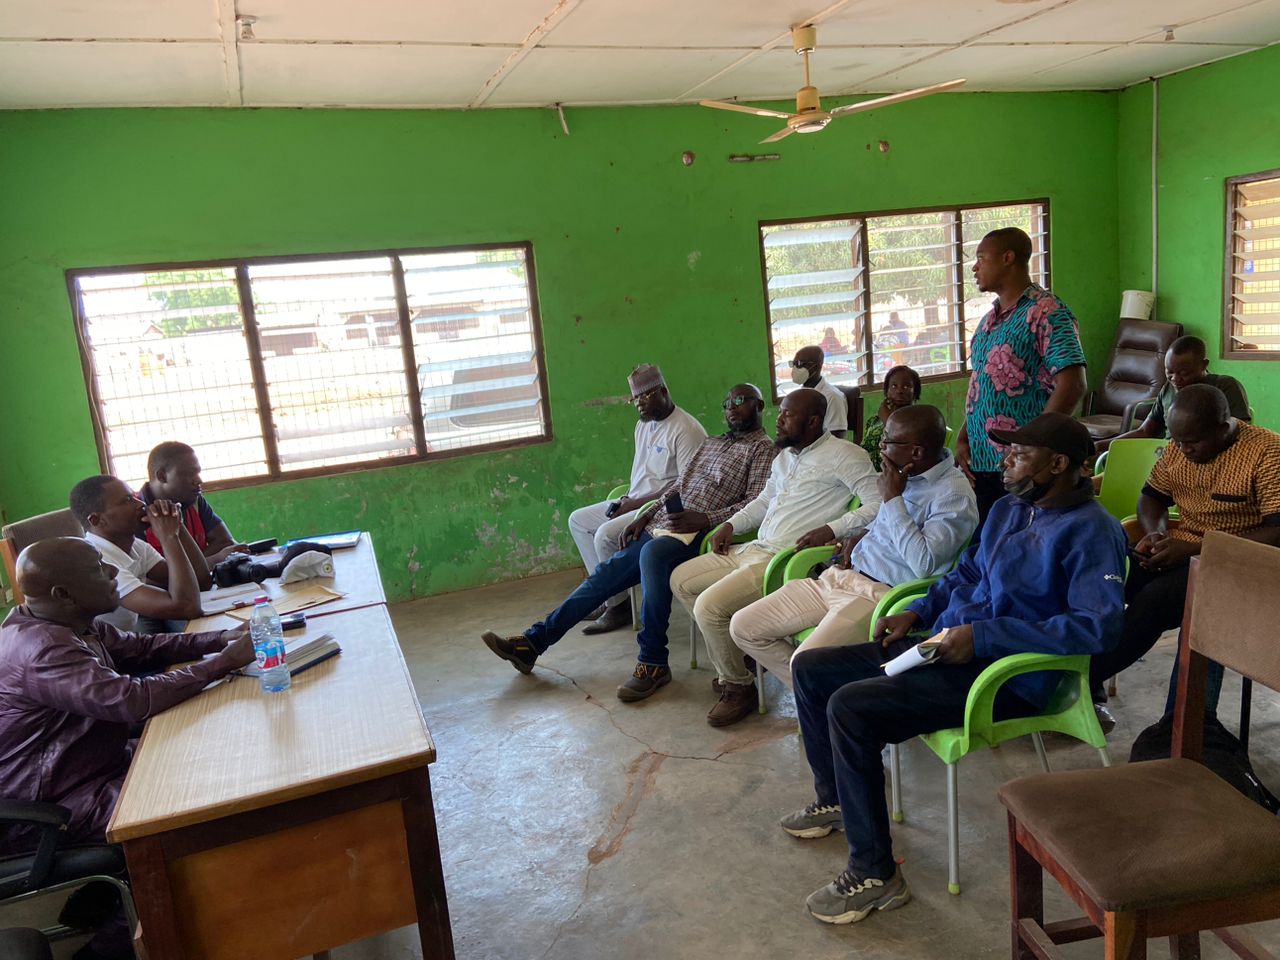 A SOCO site meeting was successfully held after the site monitoring had taken place.